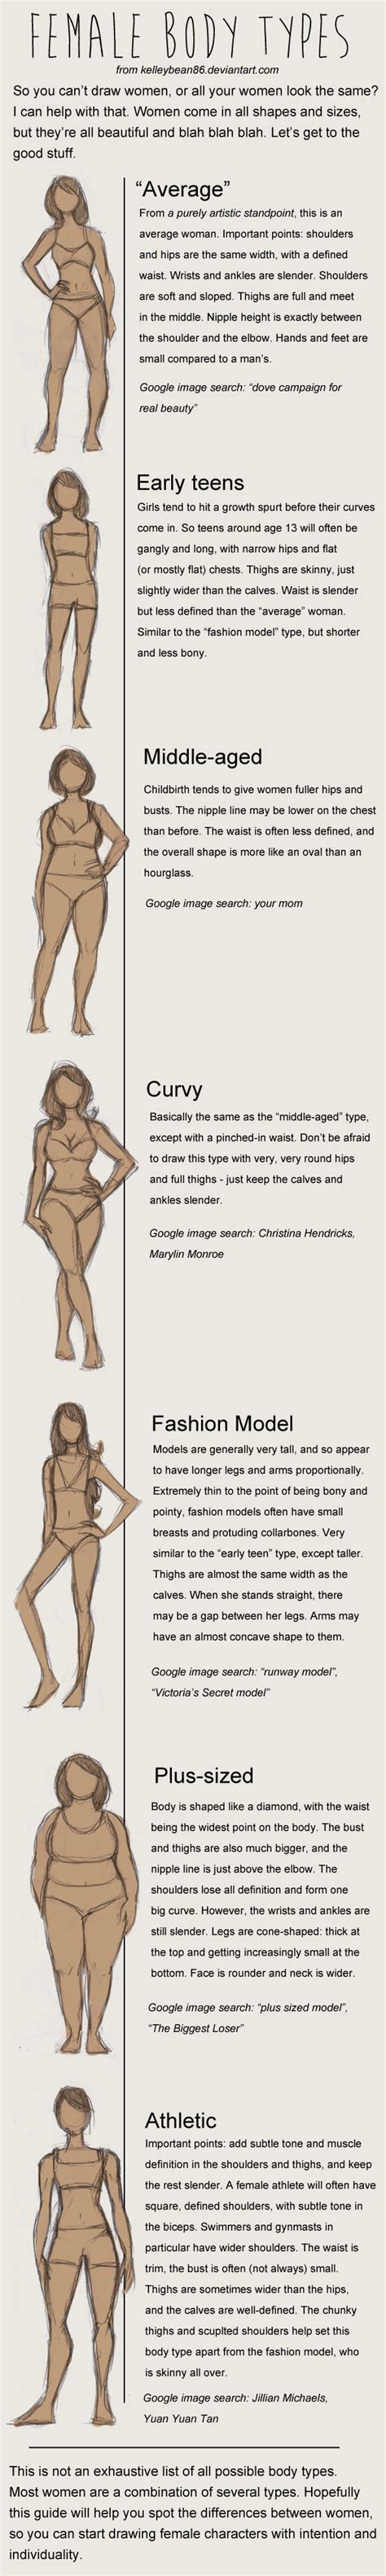 No matter how much weight you lose or how much you exercise, you will not attain the one. Female body types.